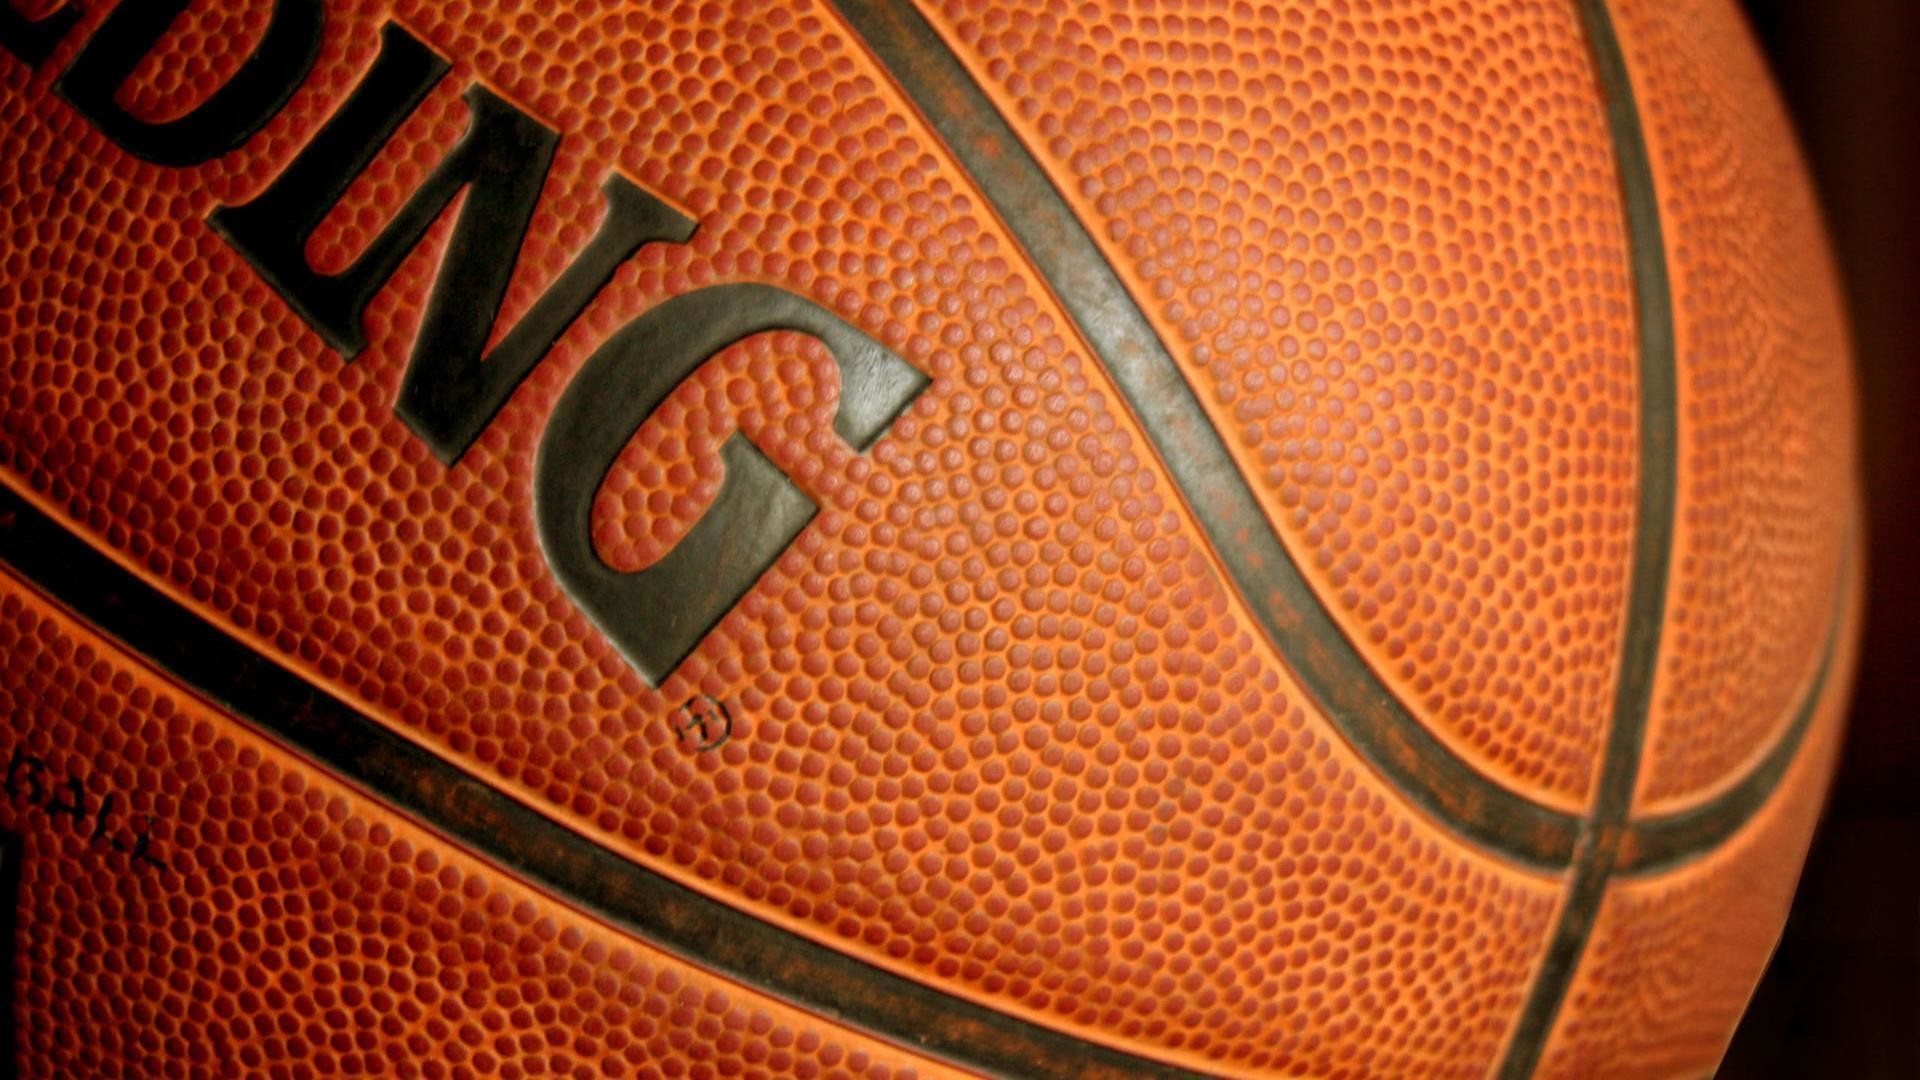 1920x1080 Sports : Basketball Wallpapers For Windows Ipad Amp Android .